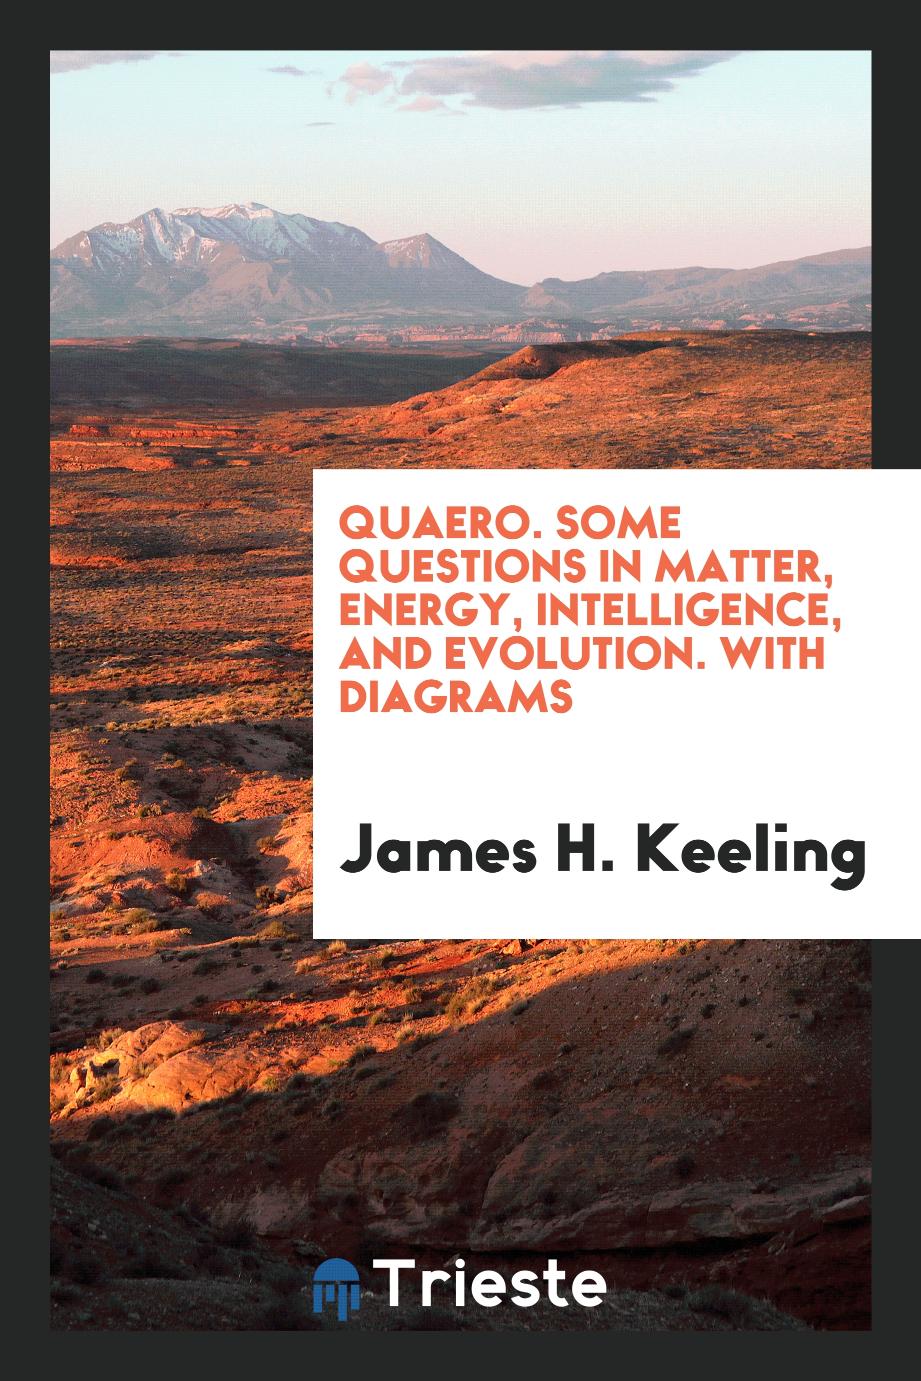 Quaero. Some questions in matter, energy, intelligence, and evolution. With diagrams